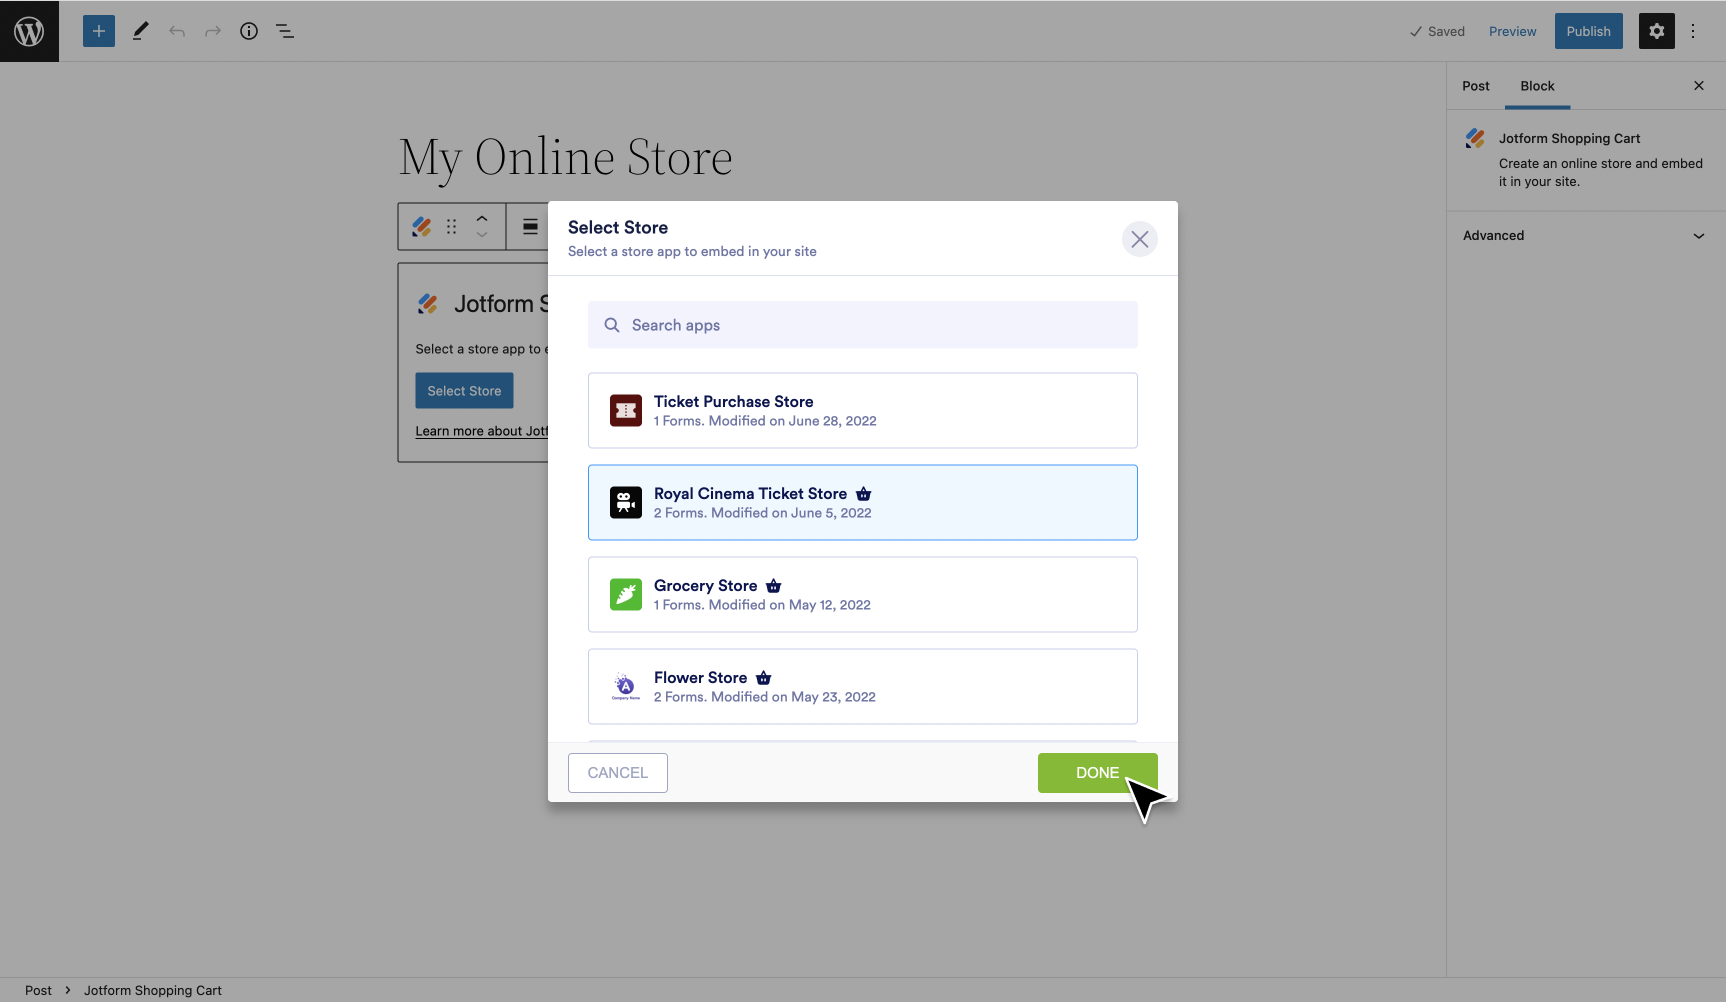 Select the store app you want to embed.